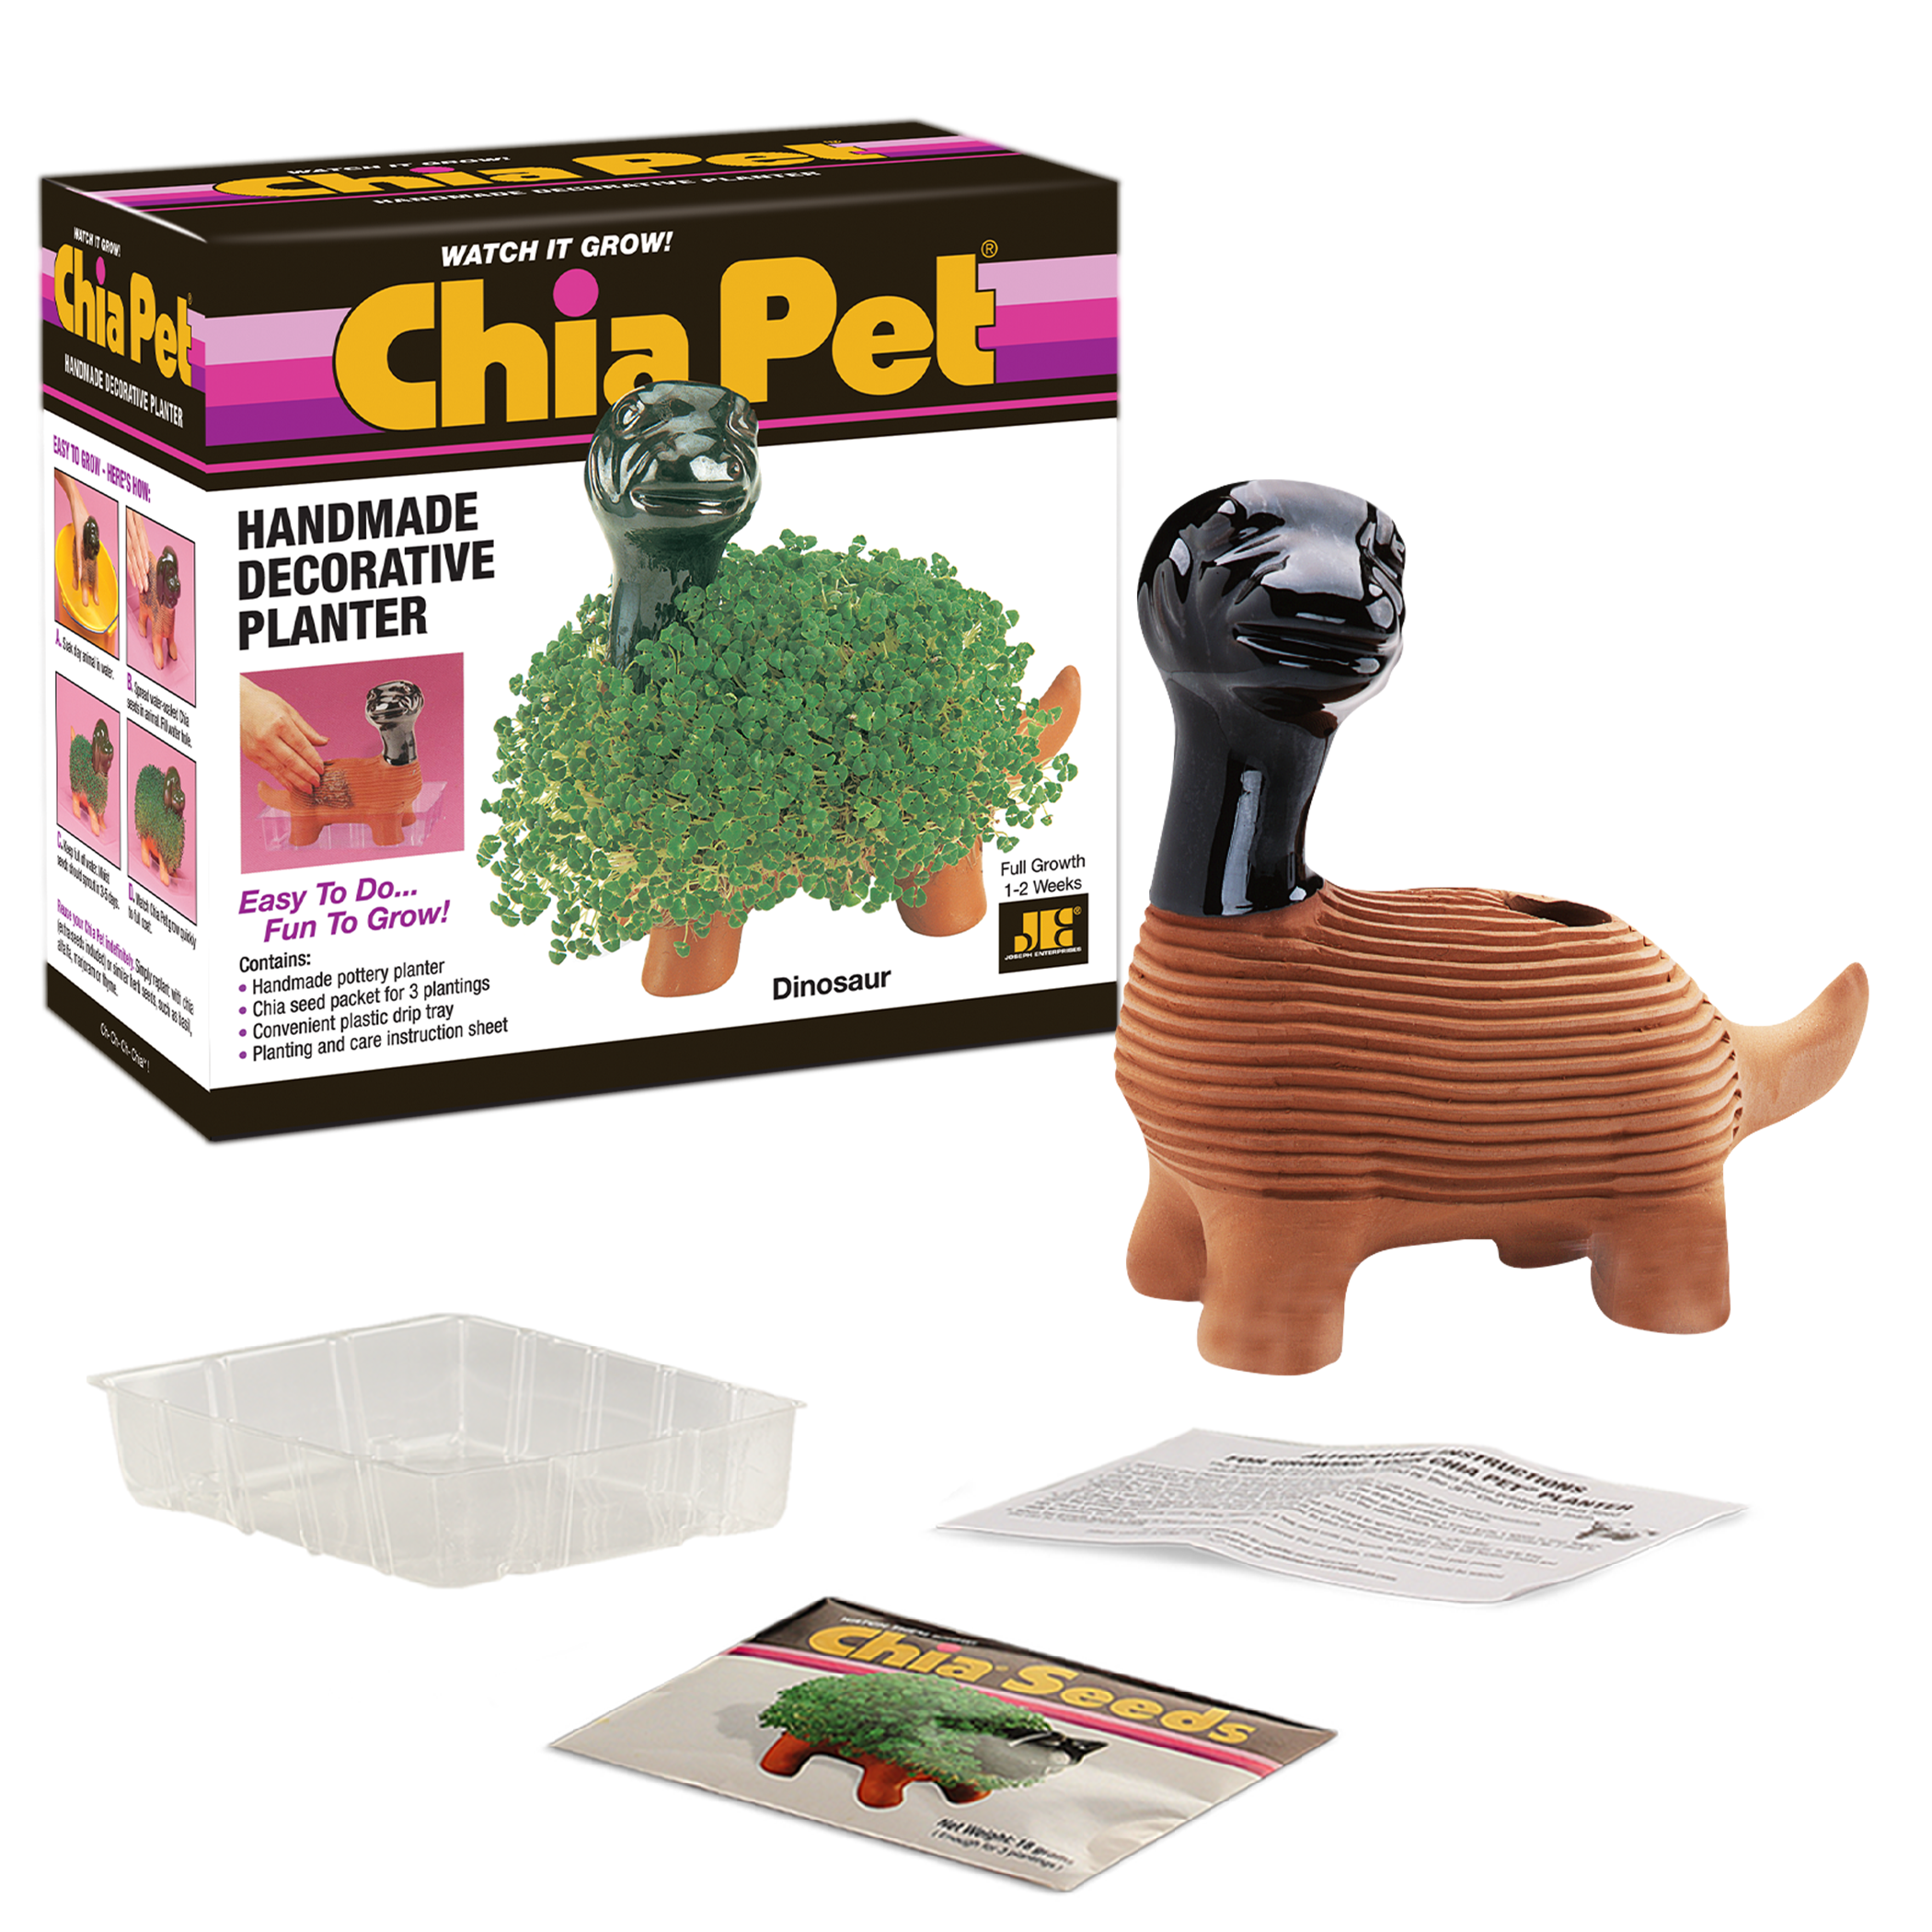 Original Dinosaur Chia Pet® with box, drip tray, seed packet, and instructions